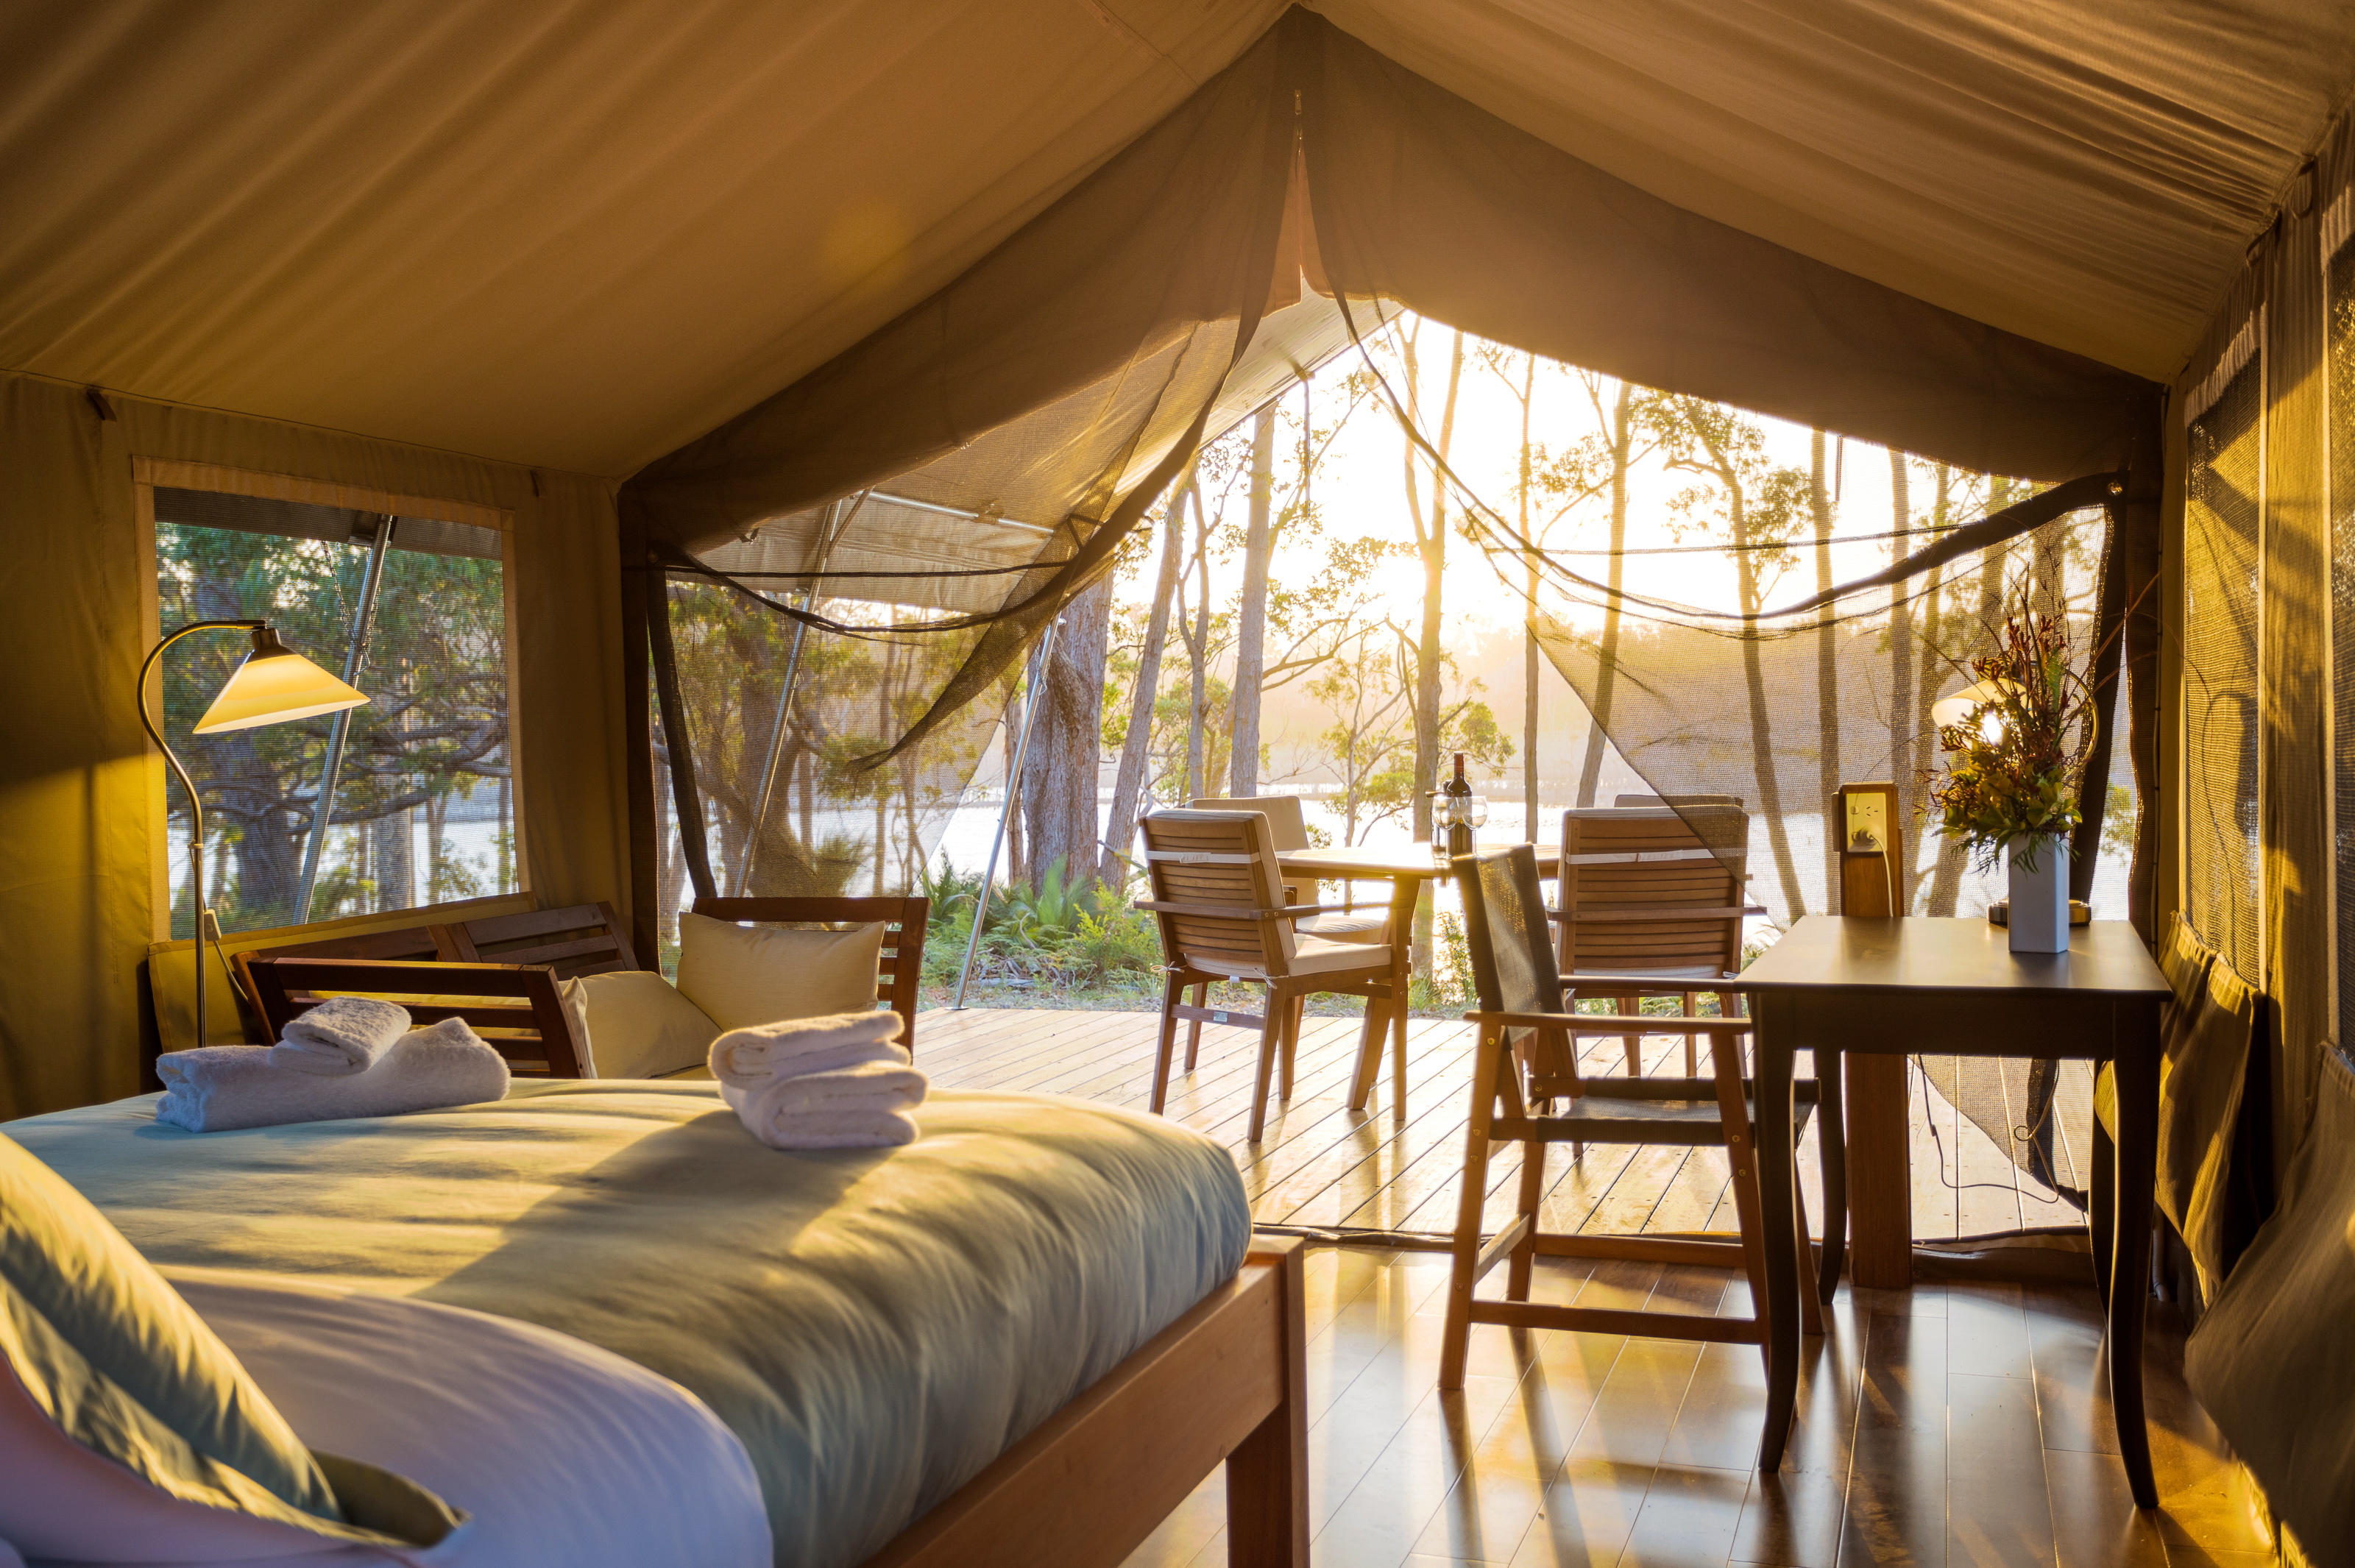 Inside a luxury safari tent with queen bed, writing desk and deck overlooking bush and lagoon at sunset